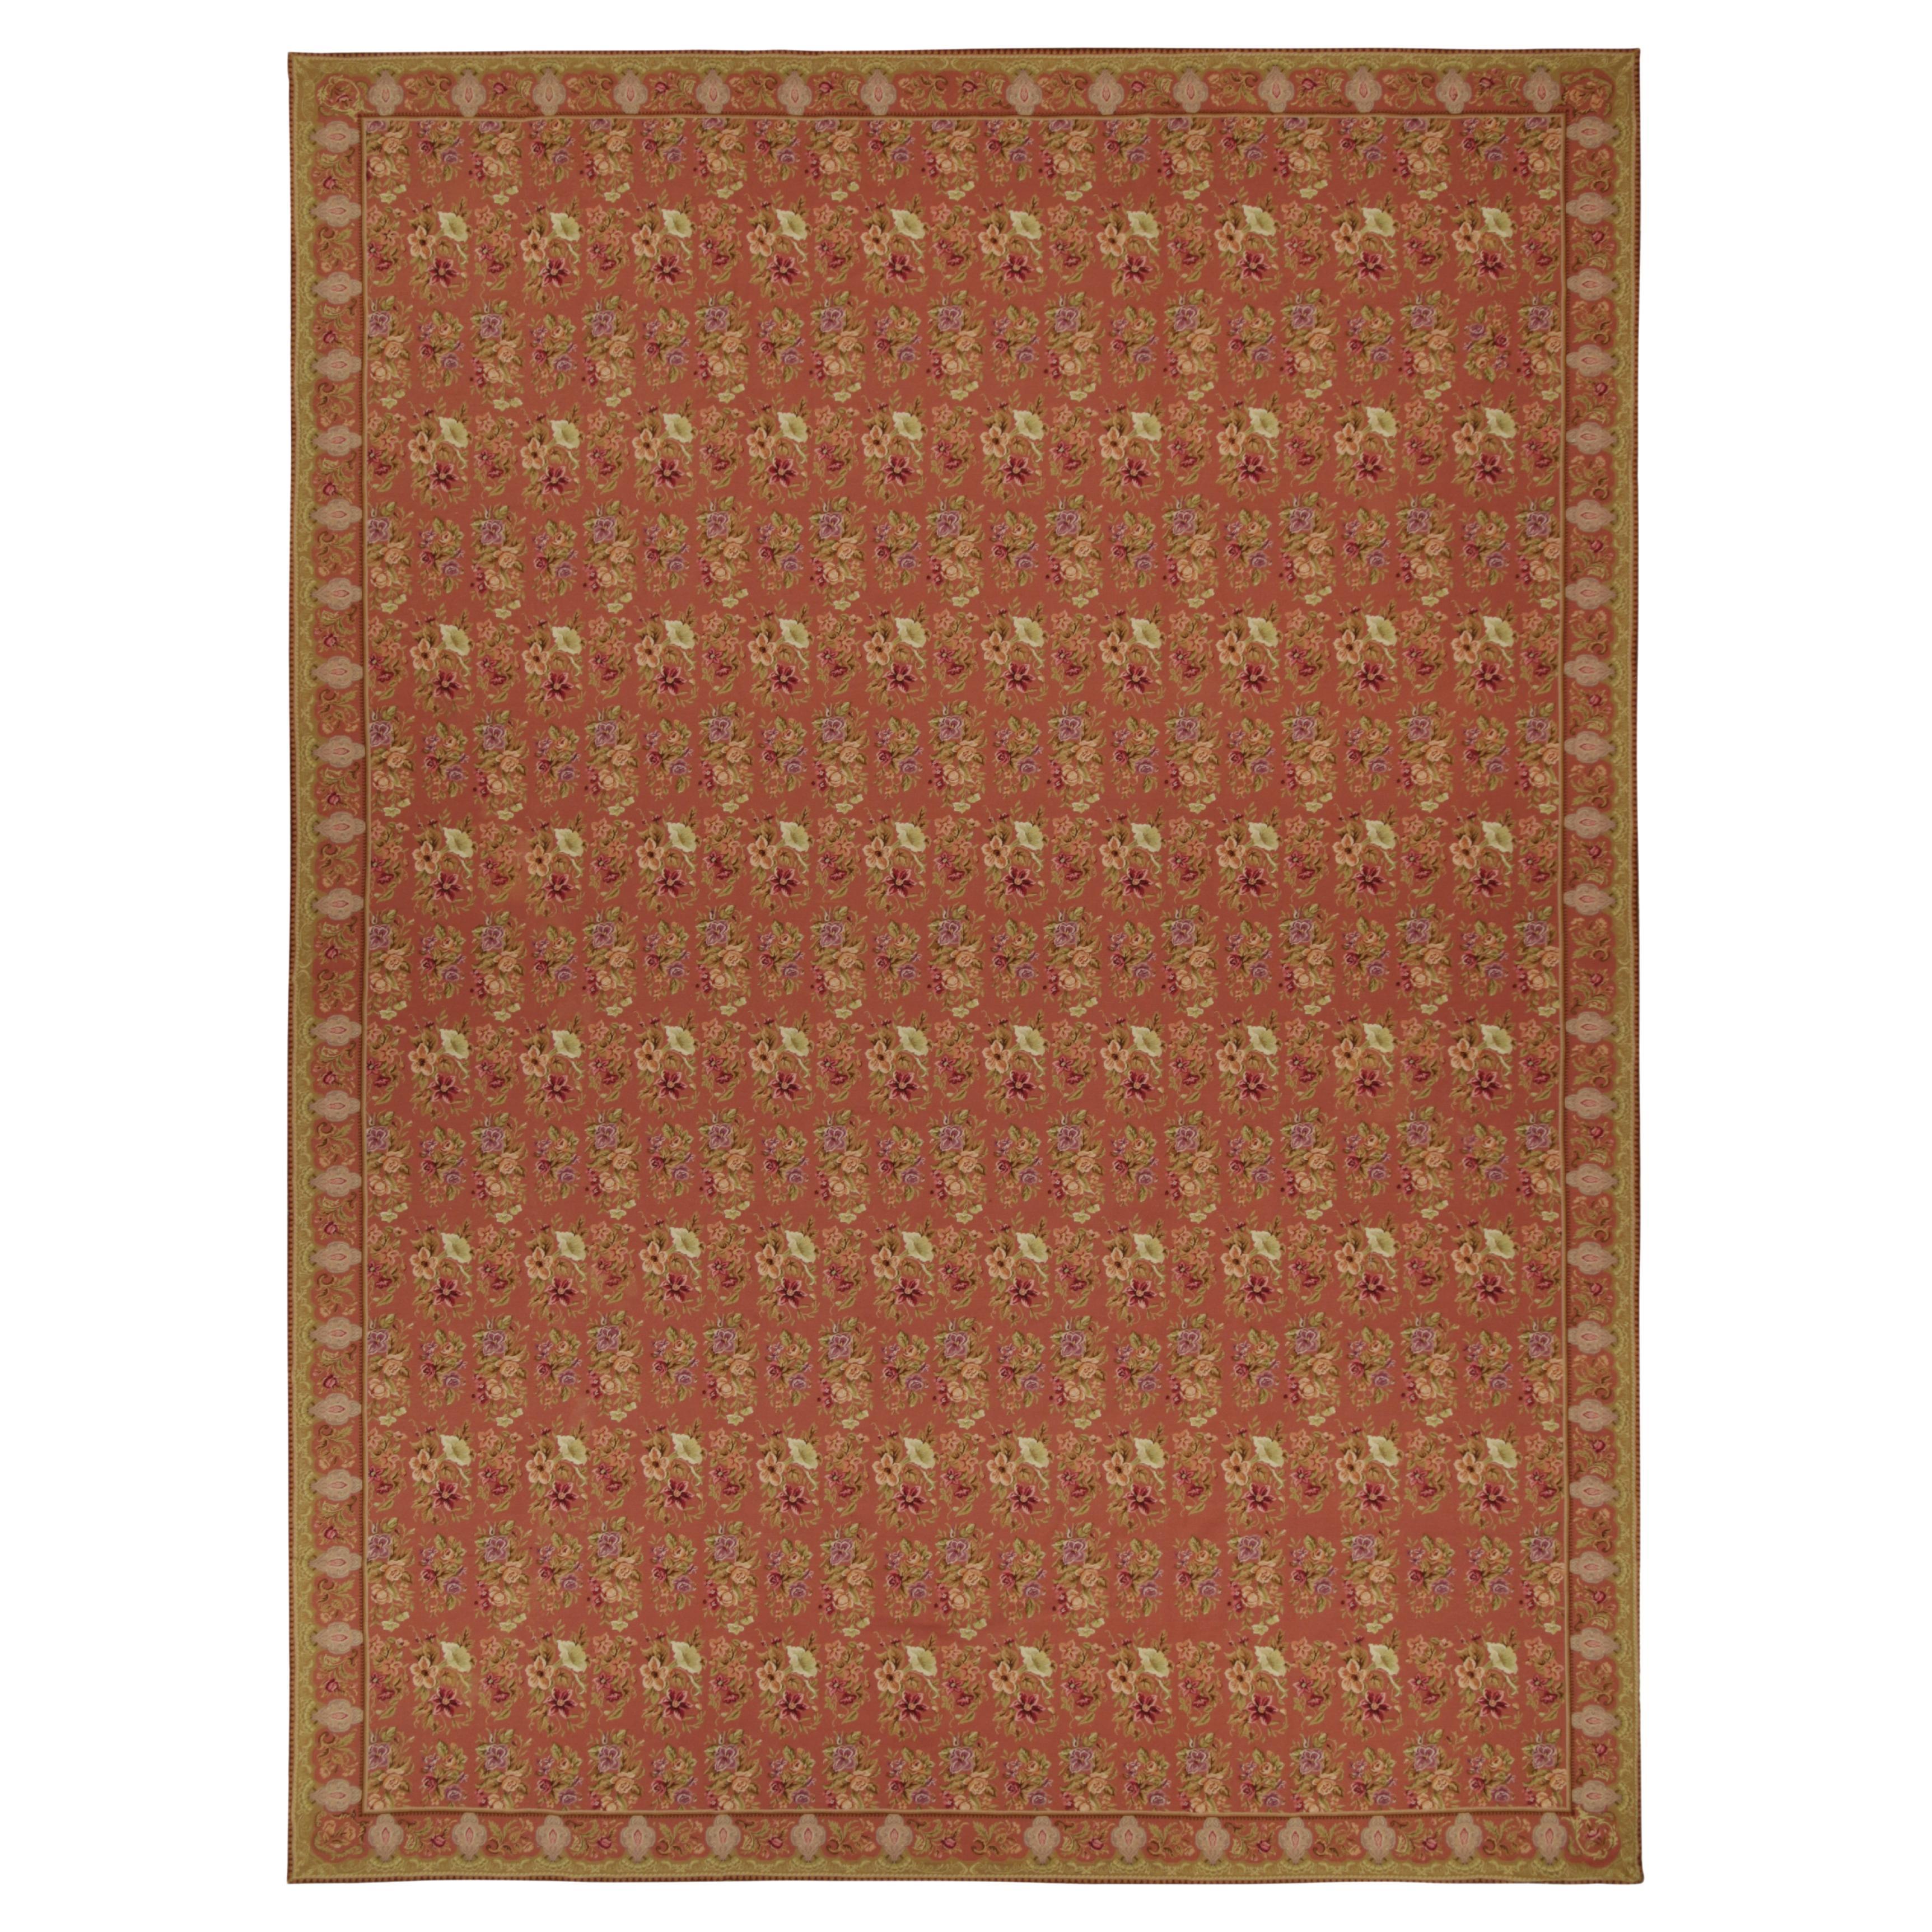 Vintage Needlepoint Rug in Red with Floral Patterns - by Rug & Kilim